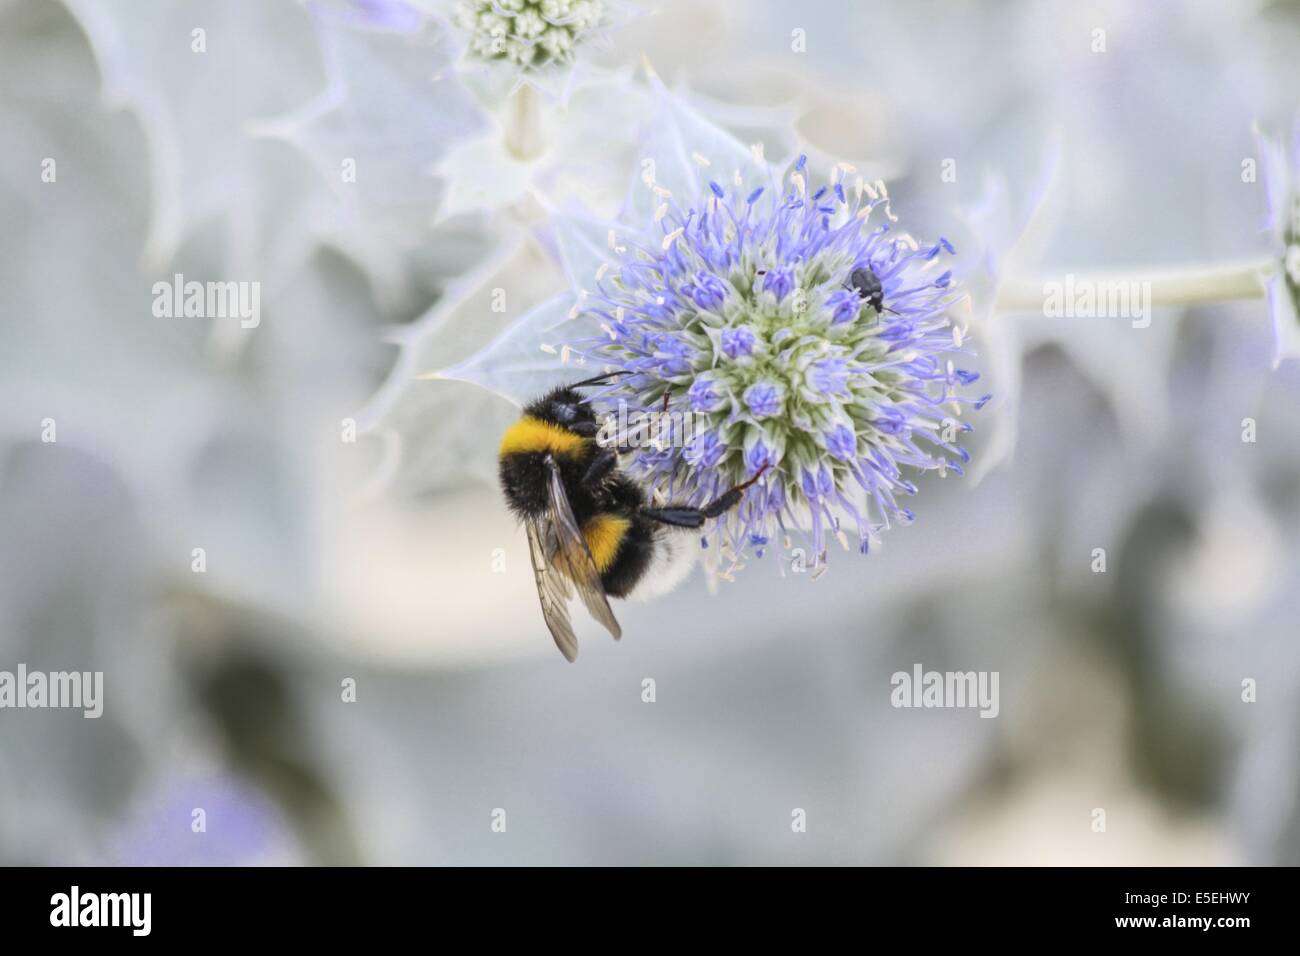 Bumblebee on flower at Cap Ferret, France Stock Photo